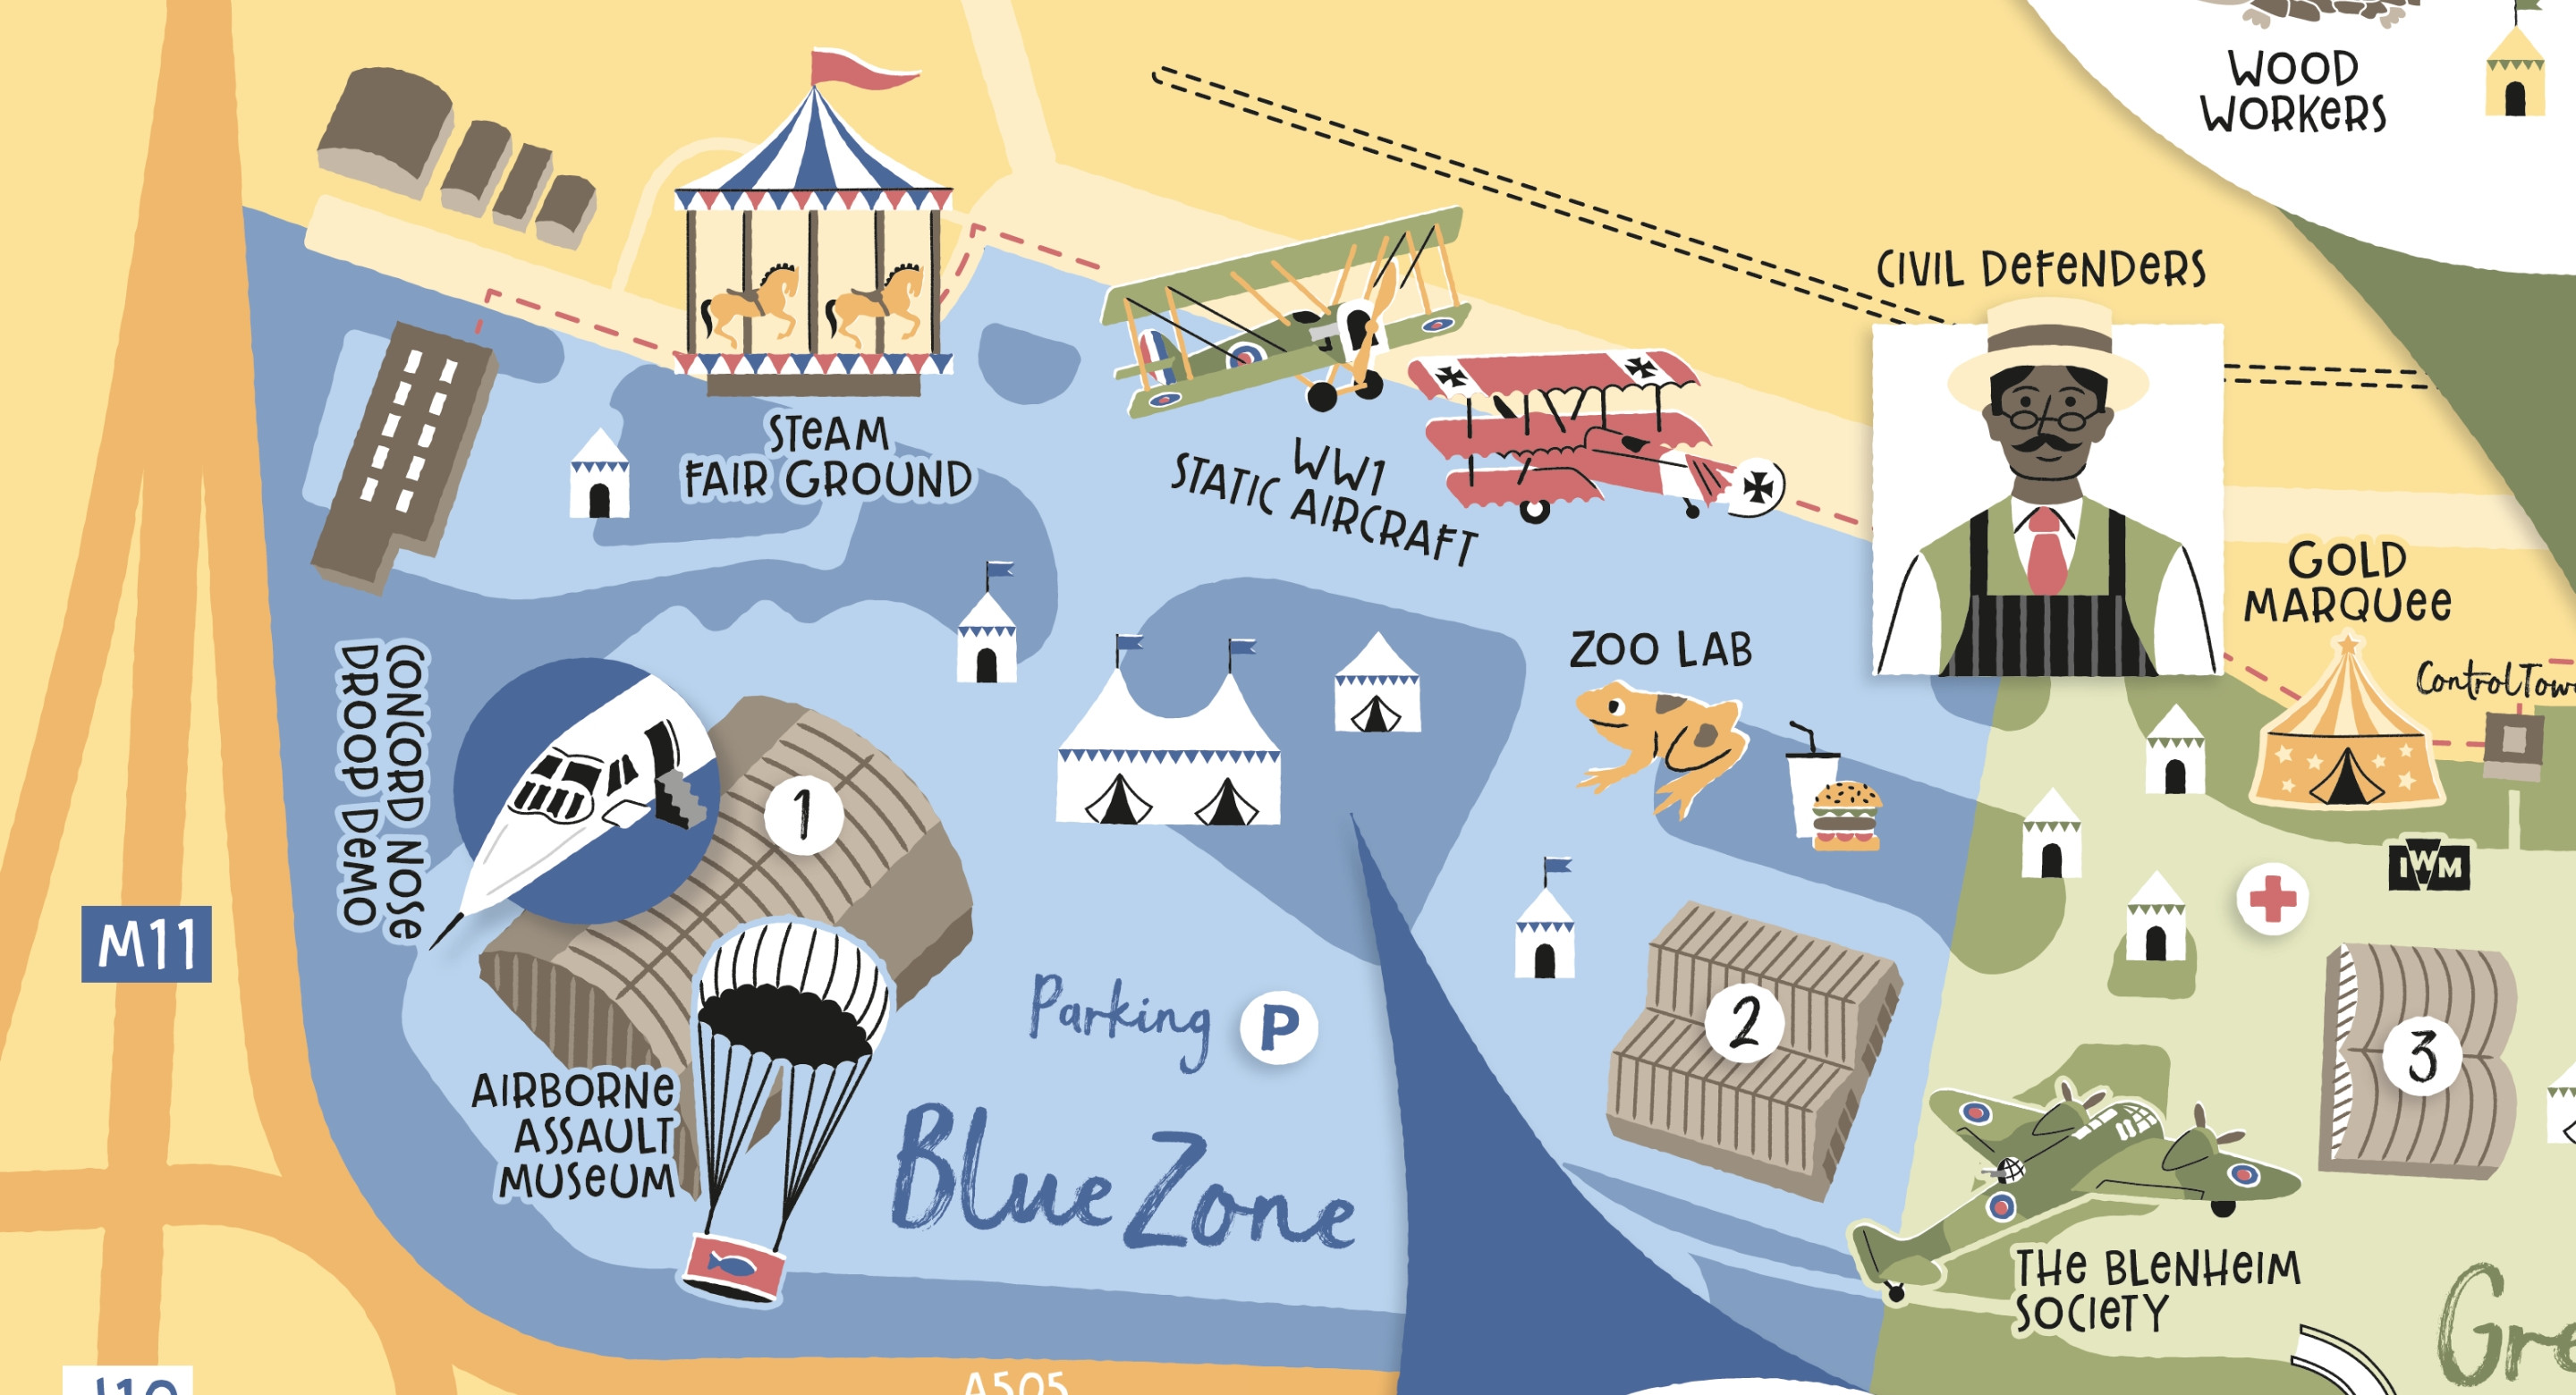 Air Show illustrated map by Root Studio